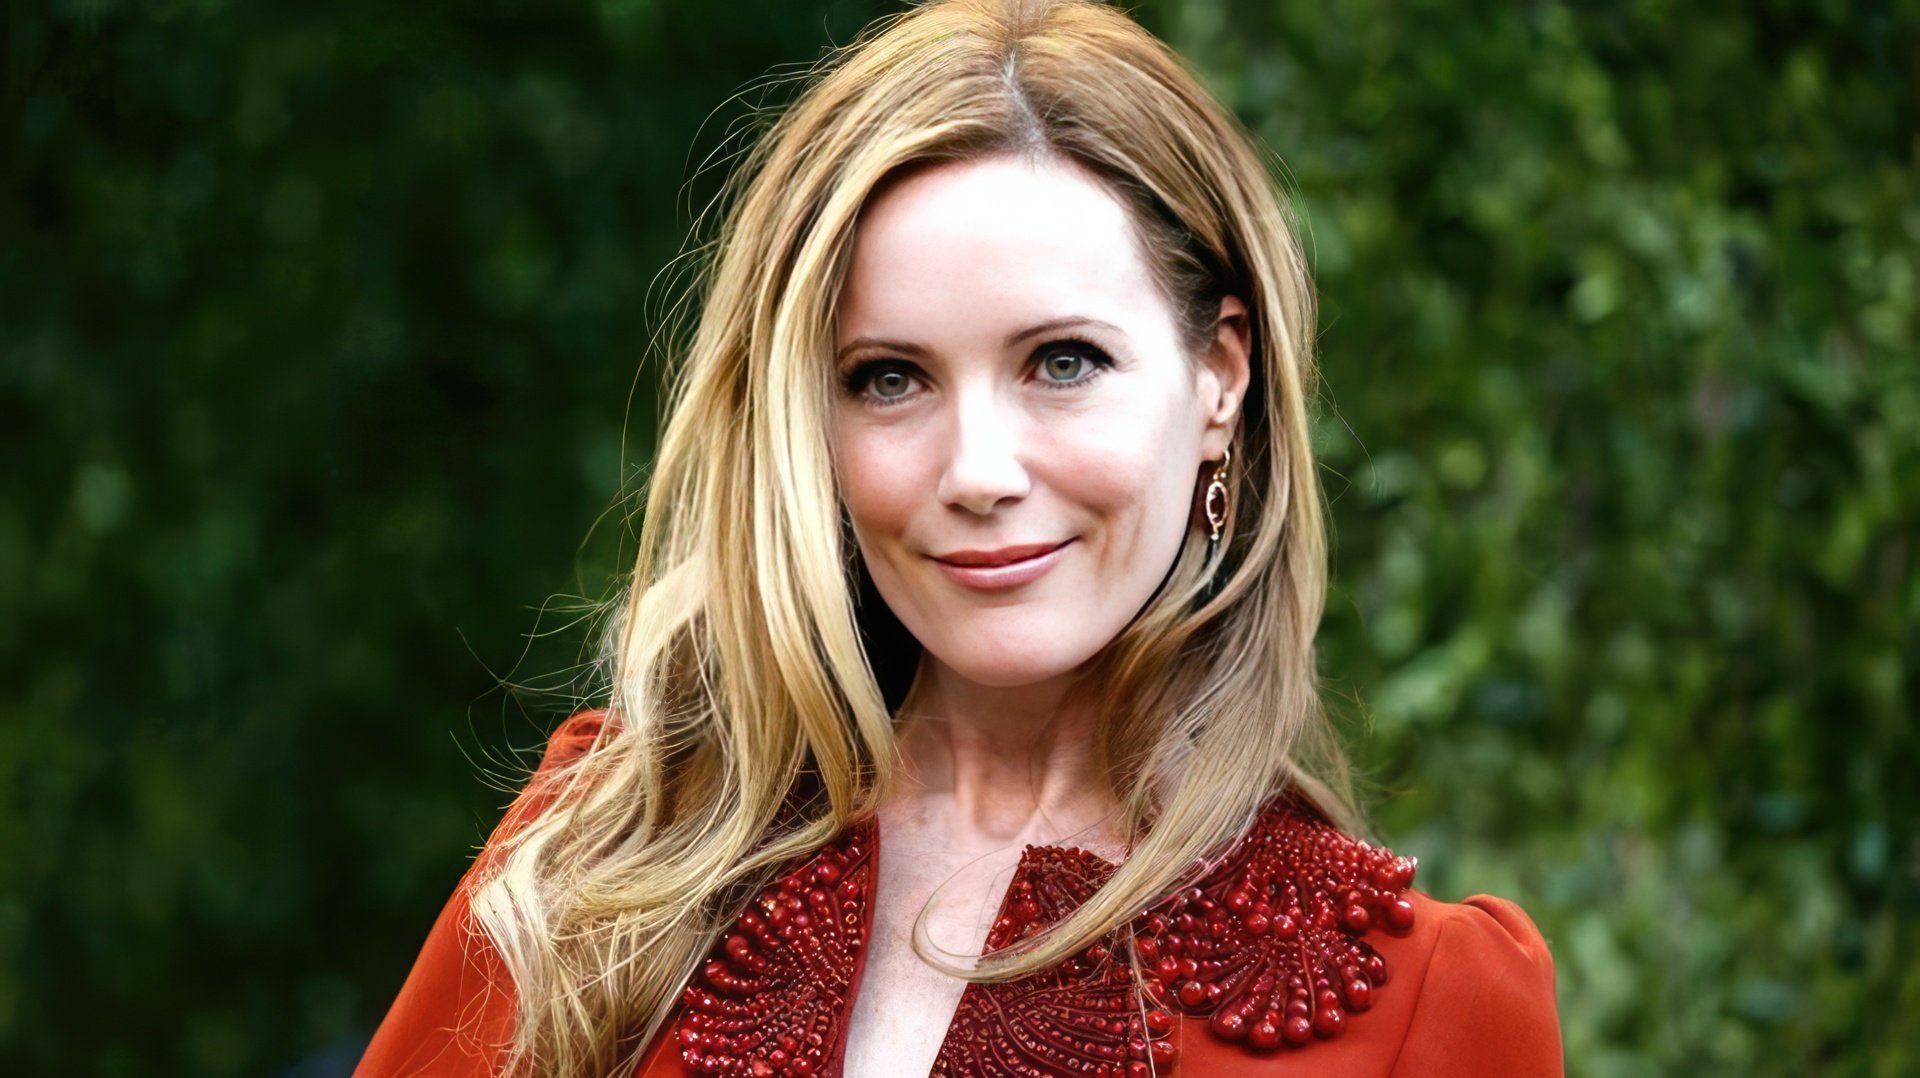 Actress Leslie Mann is Maude Apatow’s mother